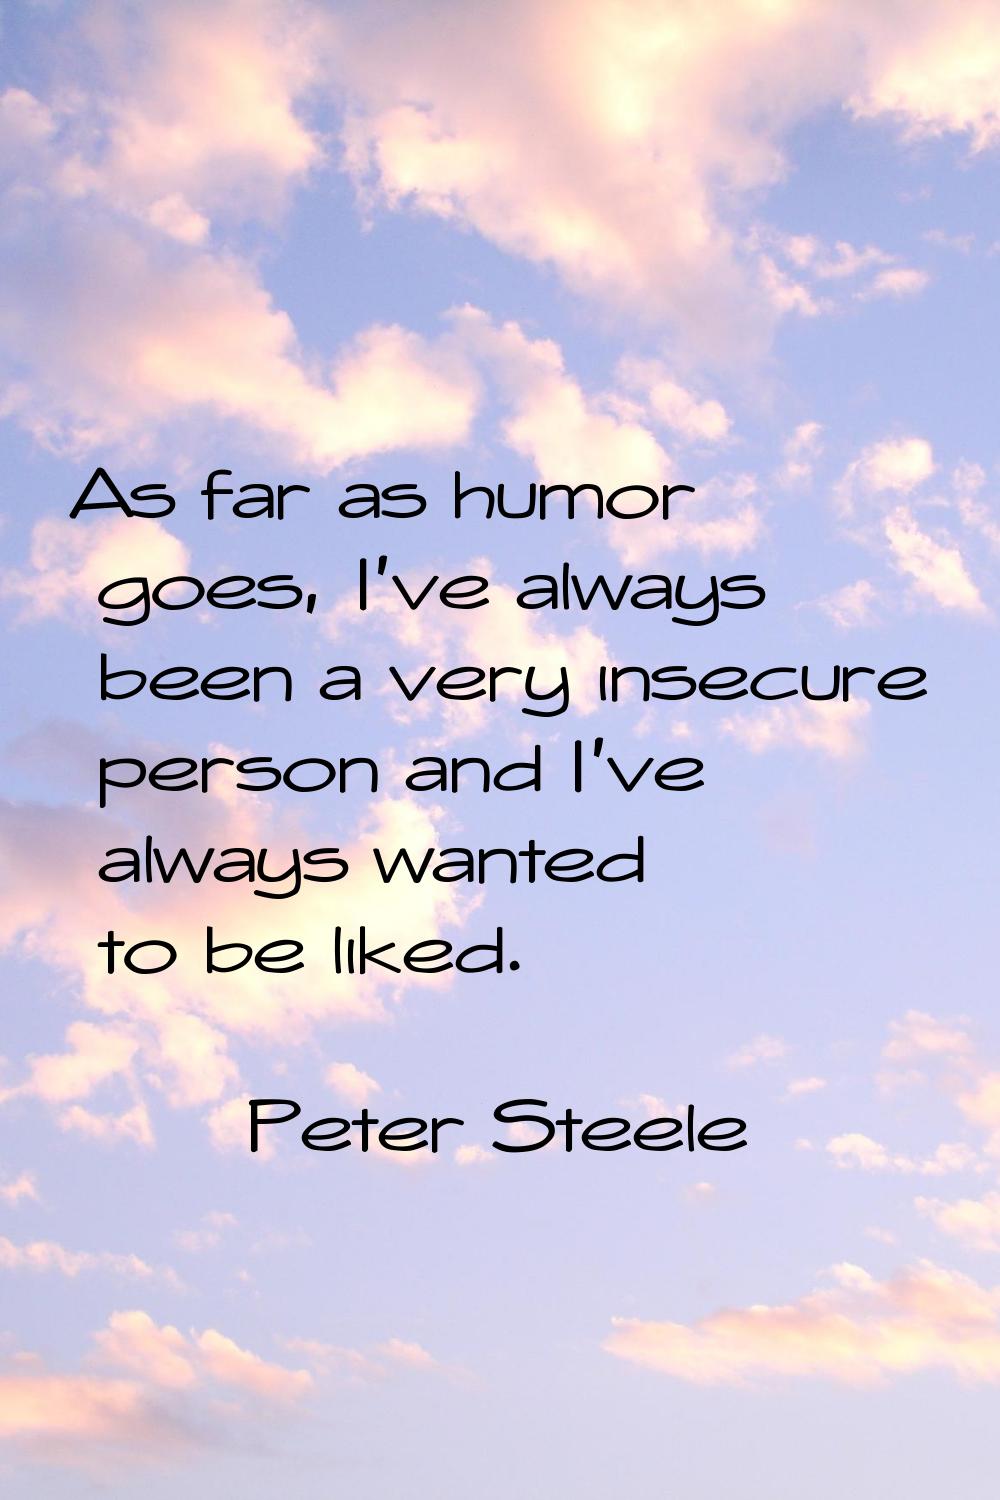 As far as humor goes, I've always been a very insecure person and I've always wanted to be liked.